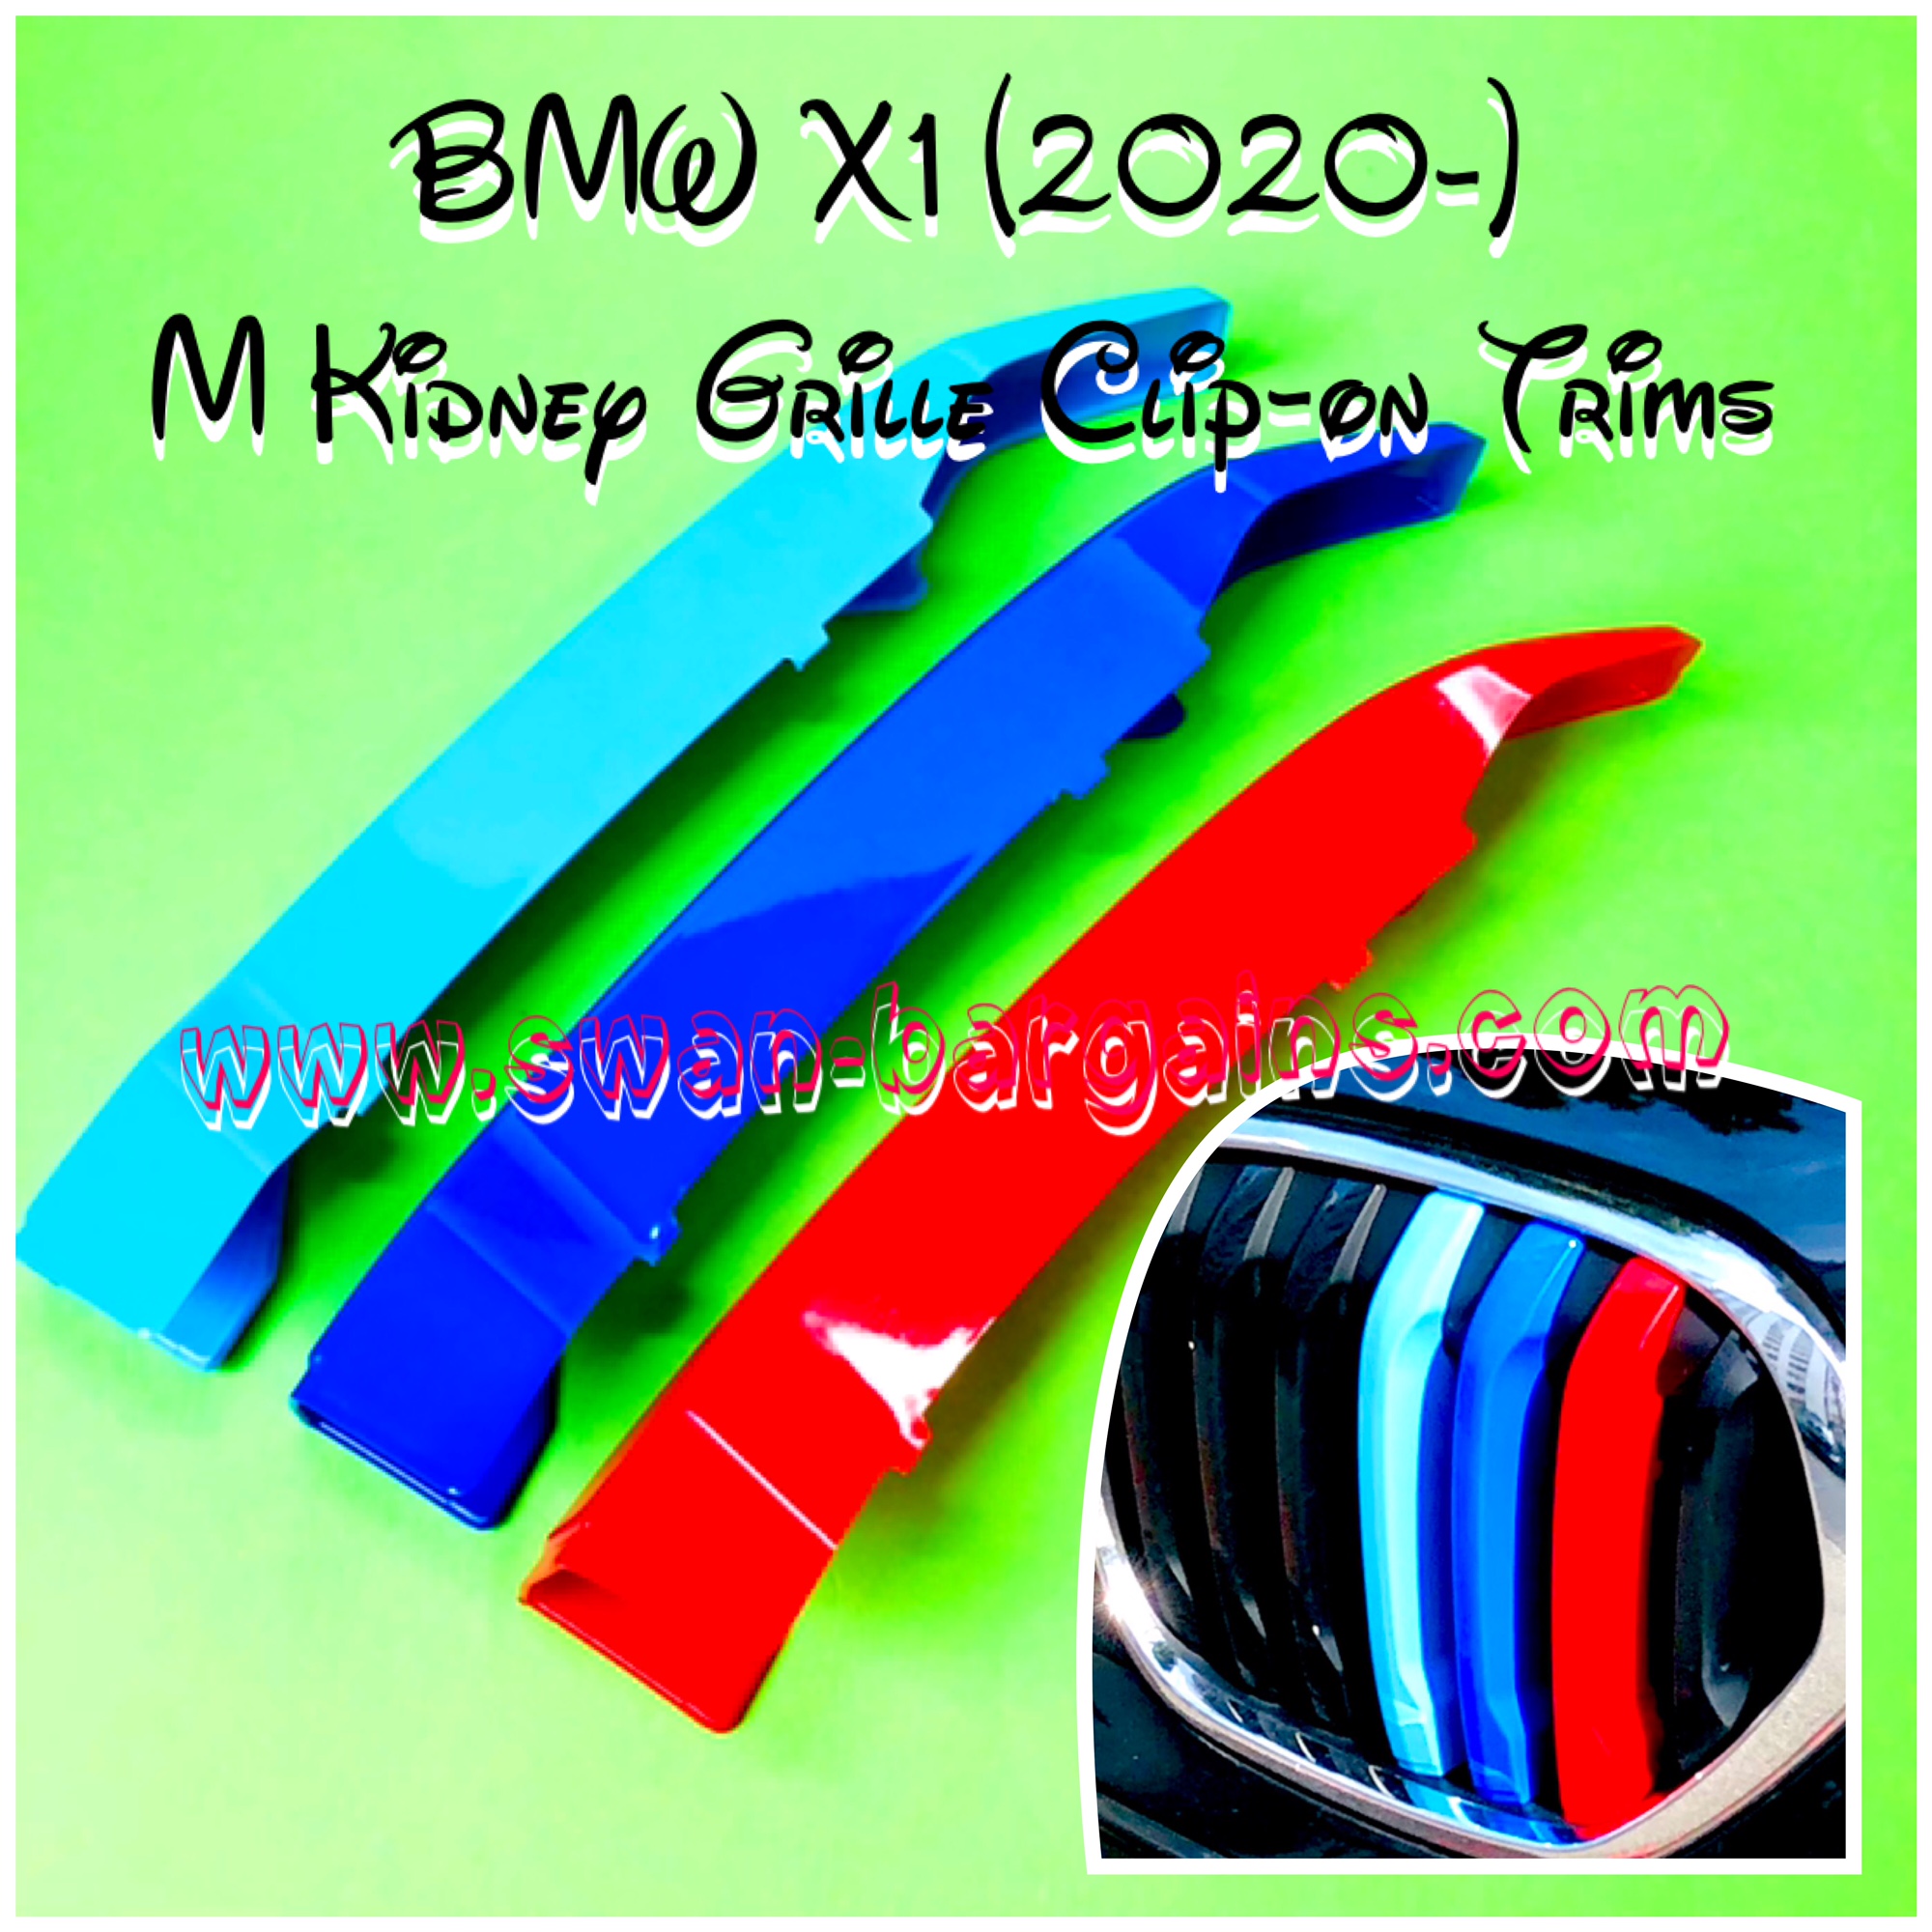 BMW X1 Kidney Grille Tri-Color Snap-in Trim 2020- Singapore